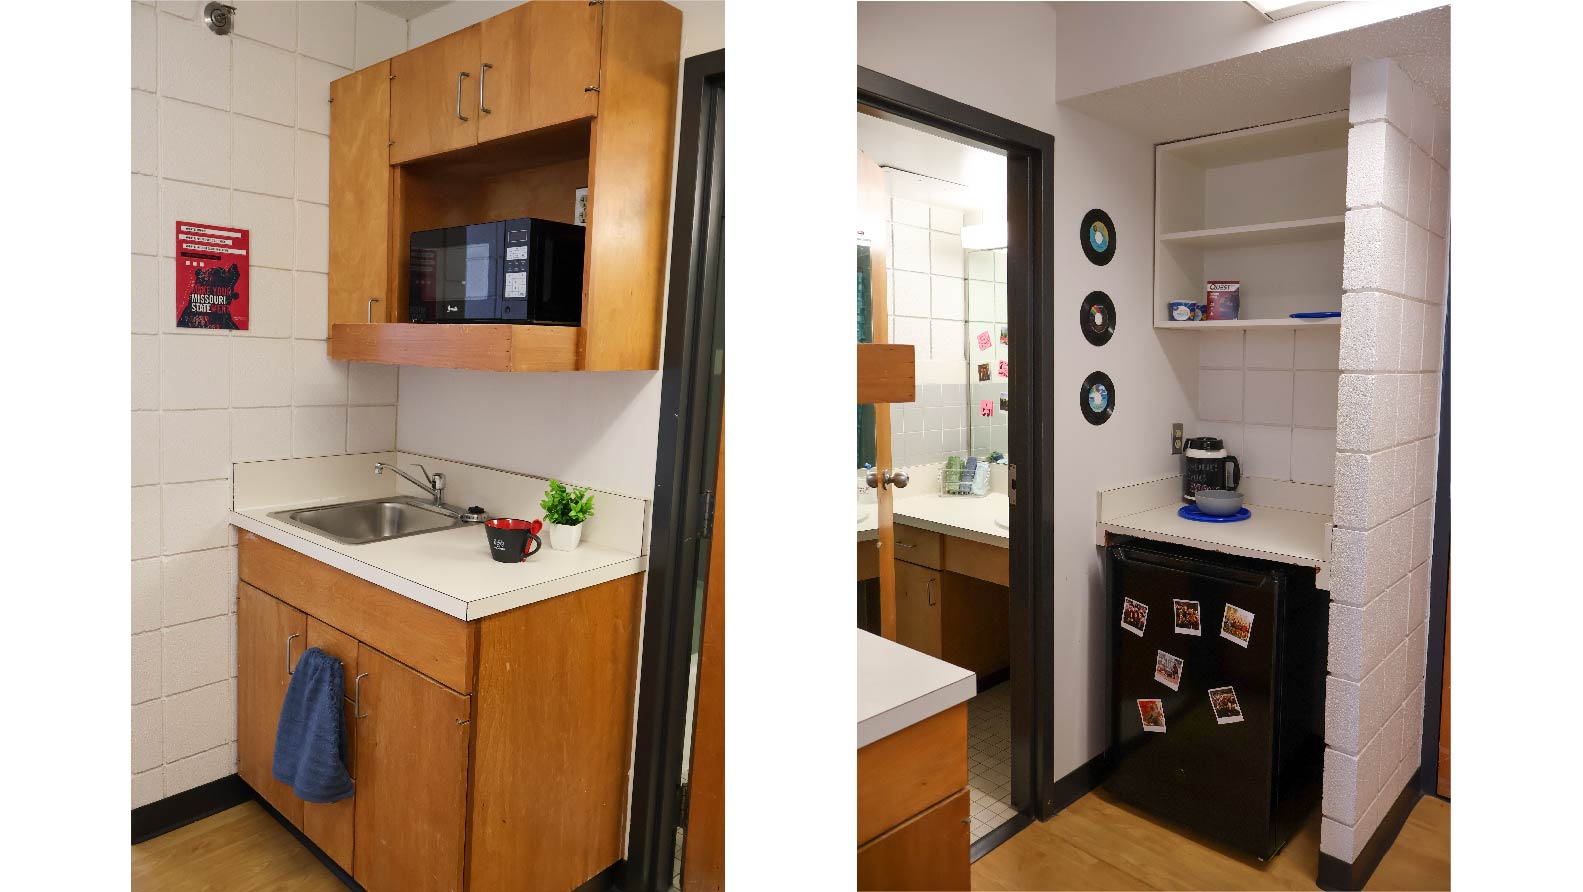 kitchenette with upper and lower cabinets microwave sink and midsize fridge